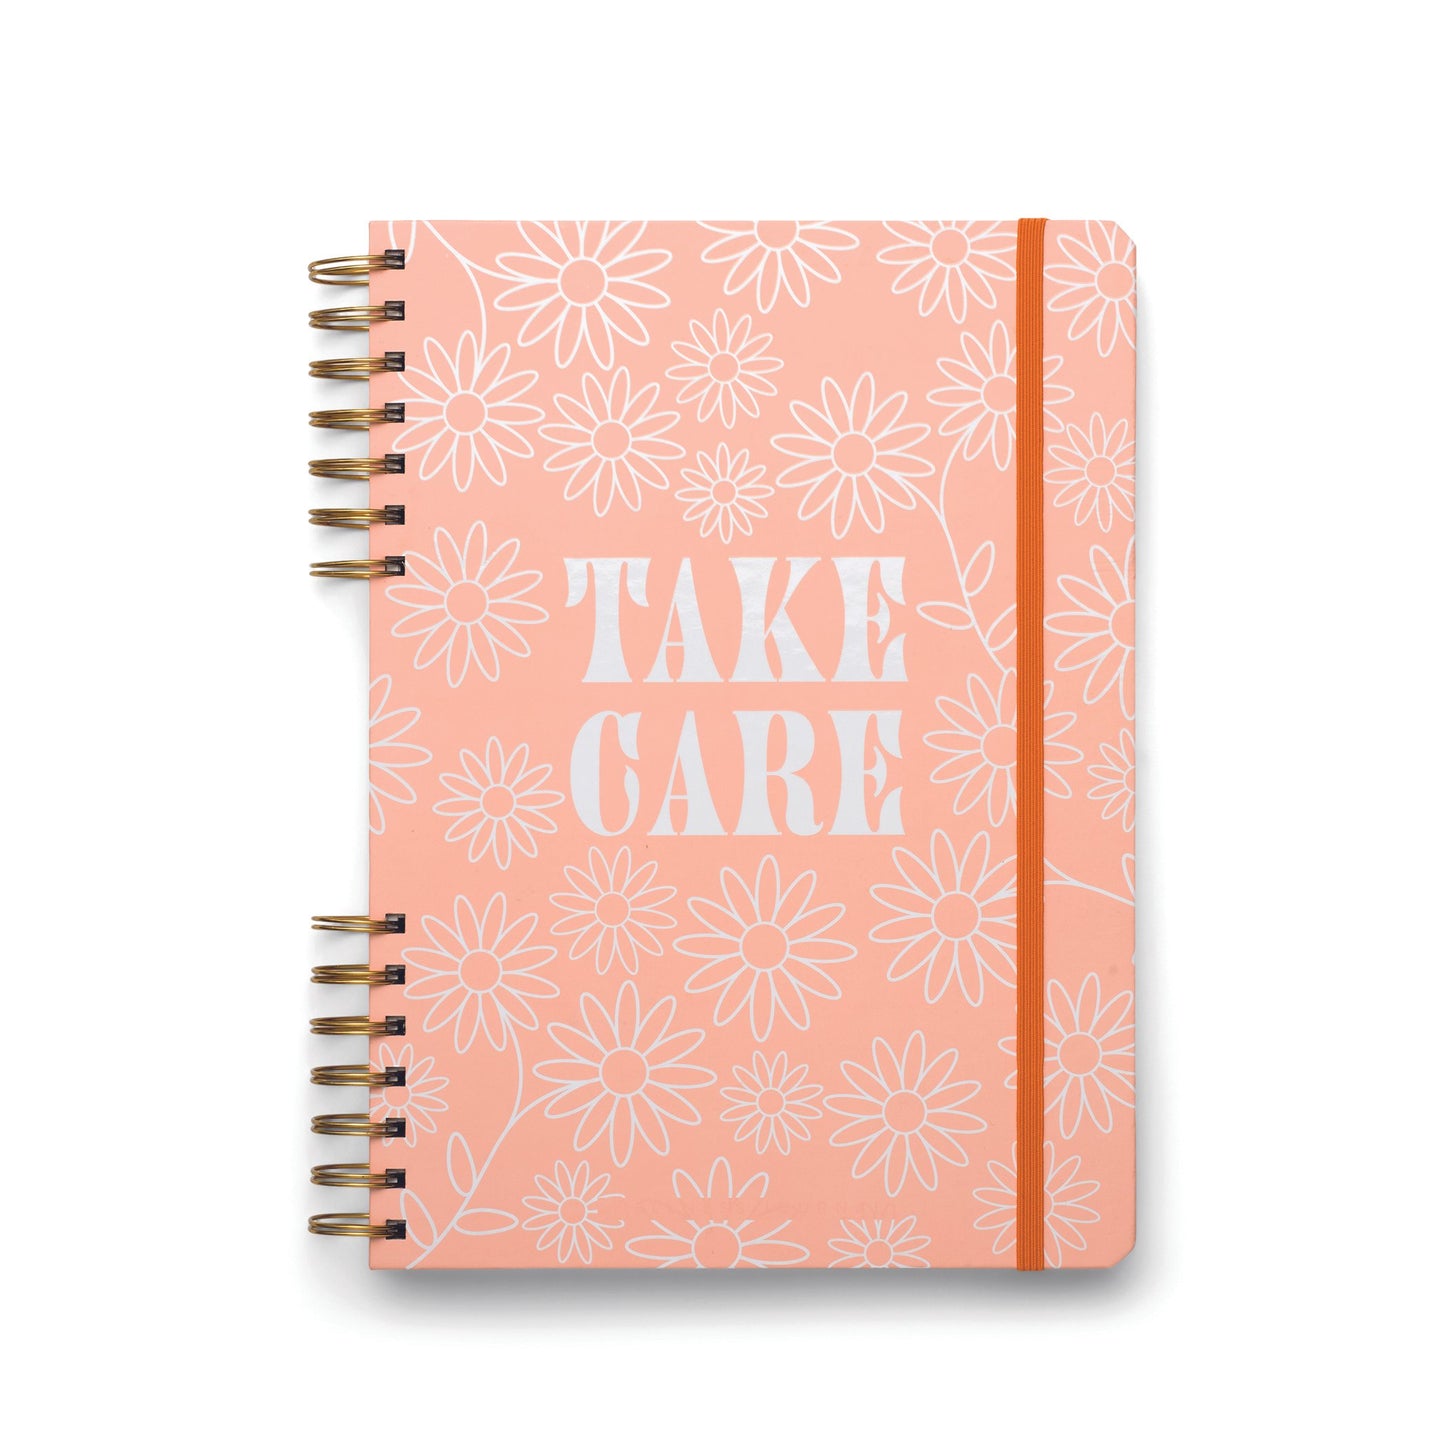 Guided Wellness Journal - "Take Care"